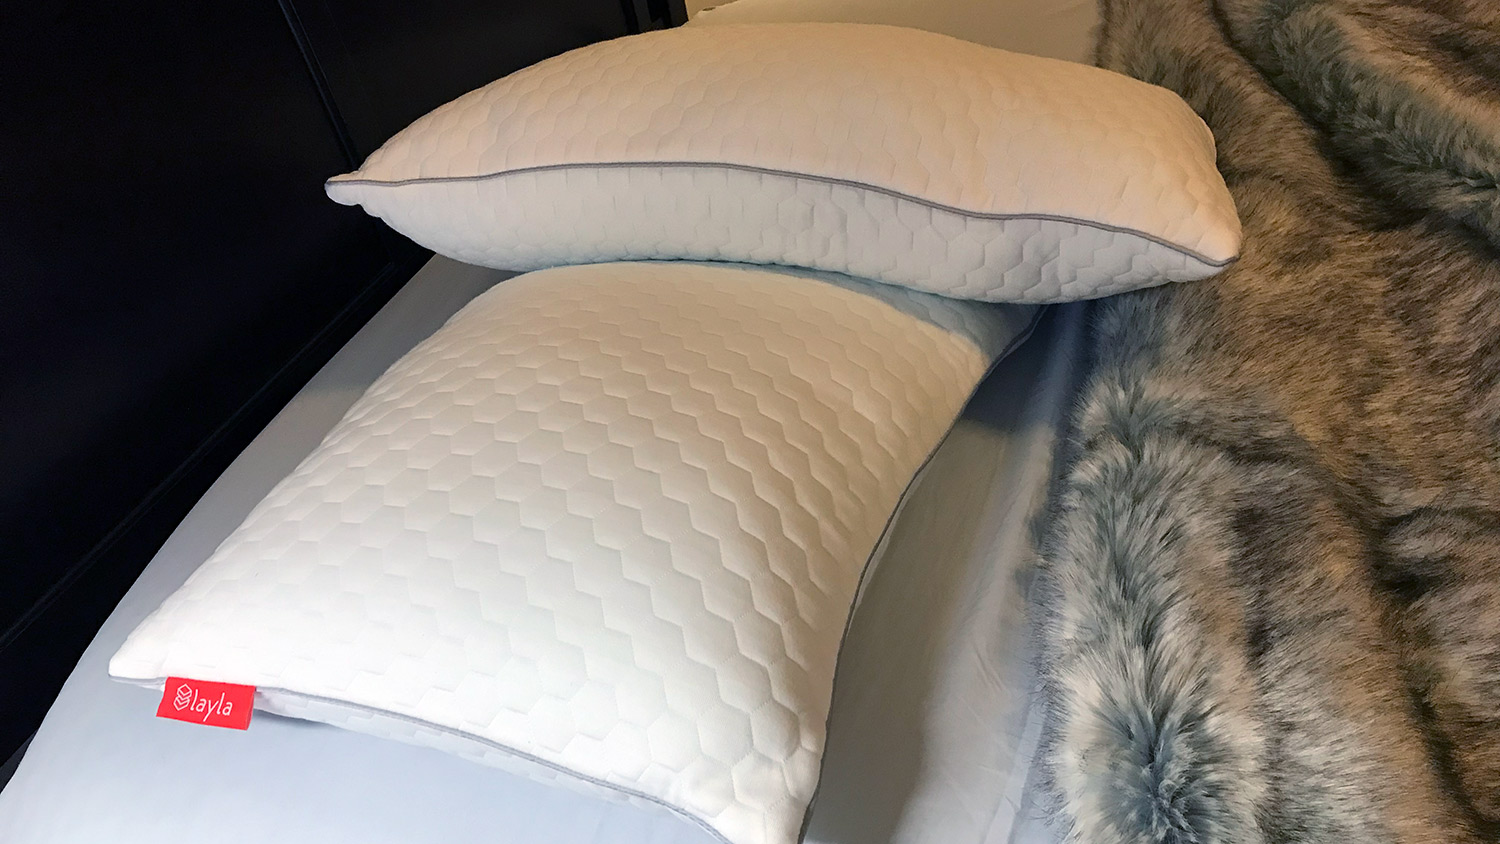 Two Layla Memory Foam Pillows on a bed